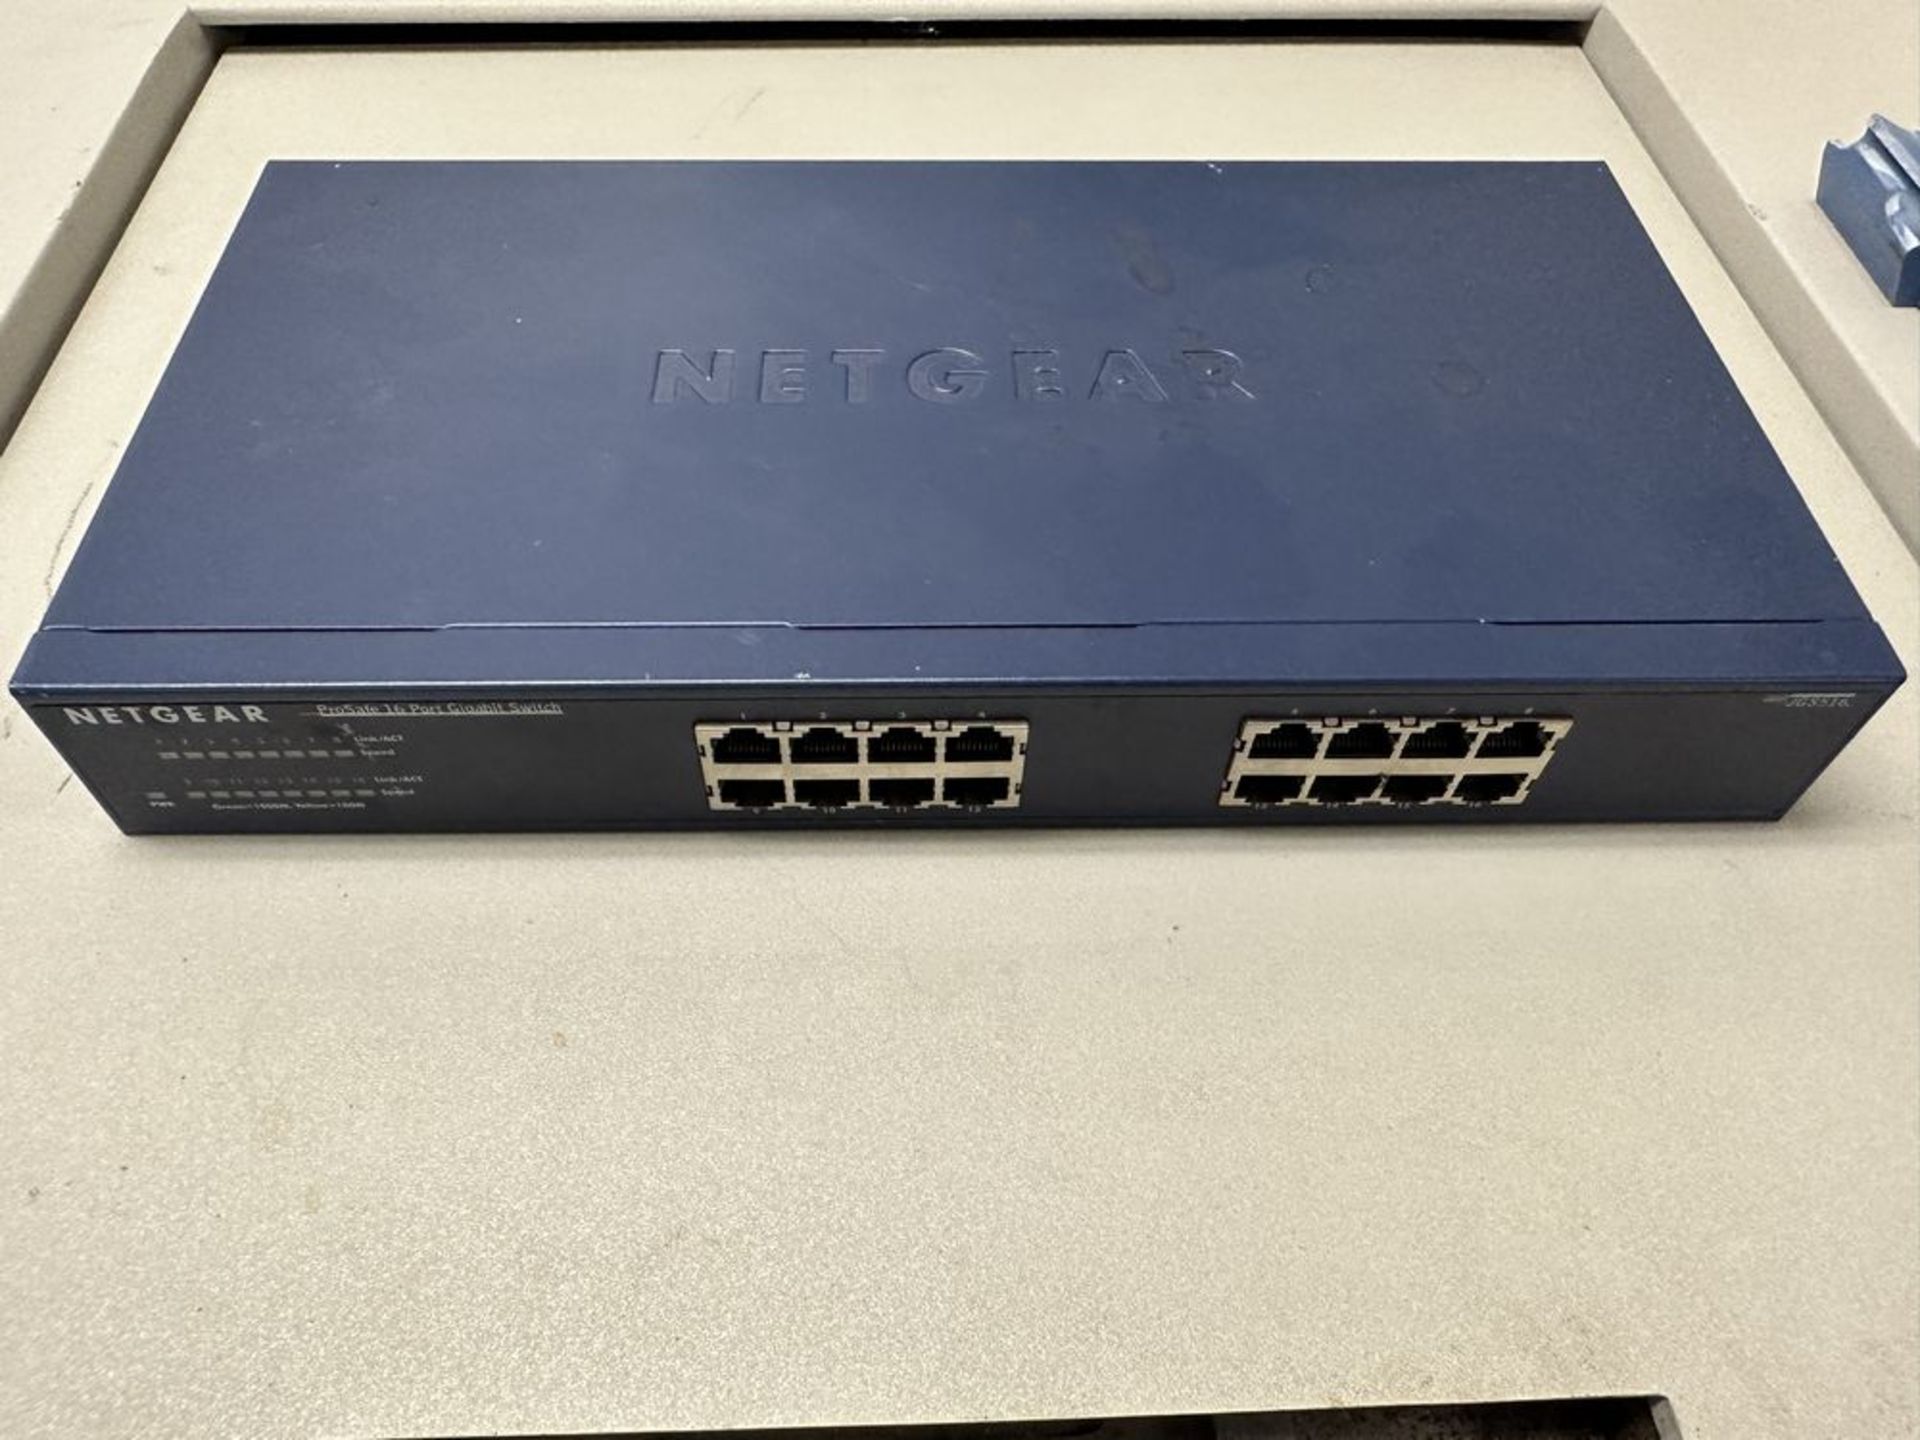 NetGear JGS516 16 Port Gigabit Switch (LOCATED IN MIDDLETOWN, N.Y.)-FOR PACKAGING & SHIPPING